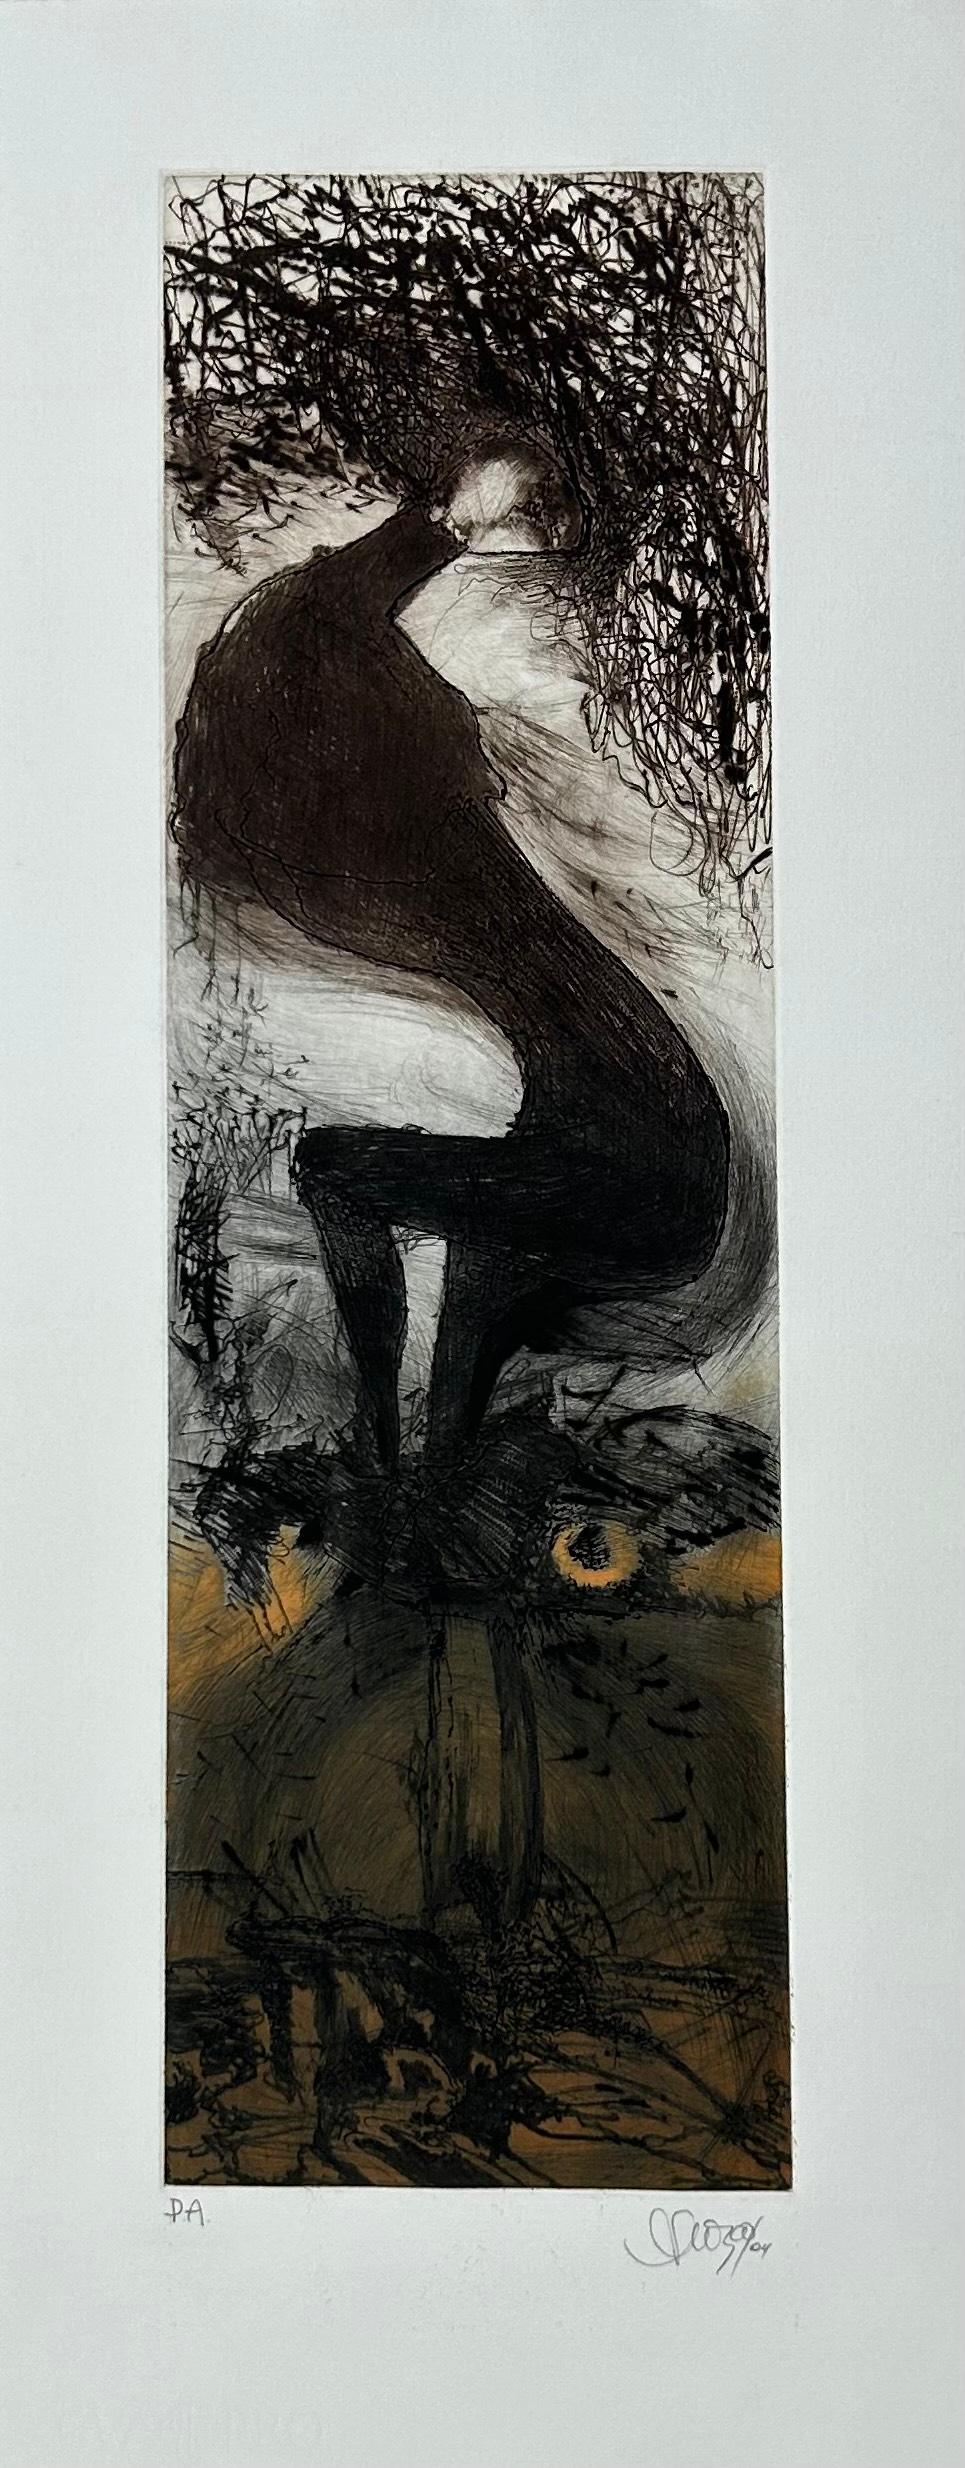 Raimundo Orozco (Cuba, 1949)
'Untitled', 2004
dry point on paper Guarro Biblos 250g.
29.7 x 12 in. (75.2 x 30.4 cm.)
Edition of 30
ID: ORO-306-3
Hand-signed by author